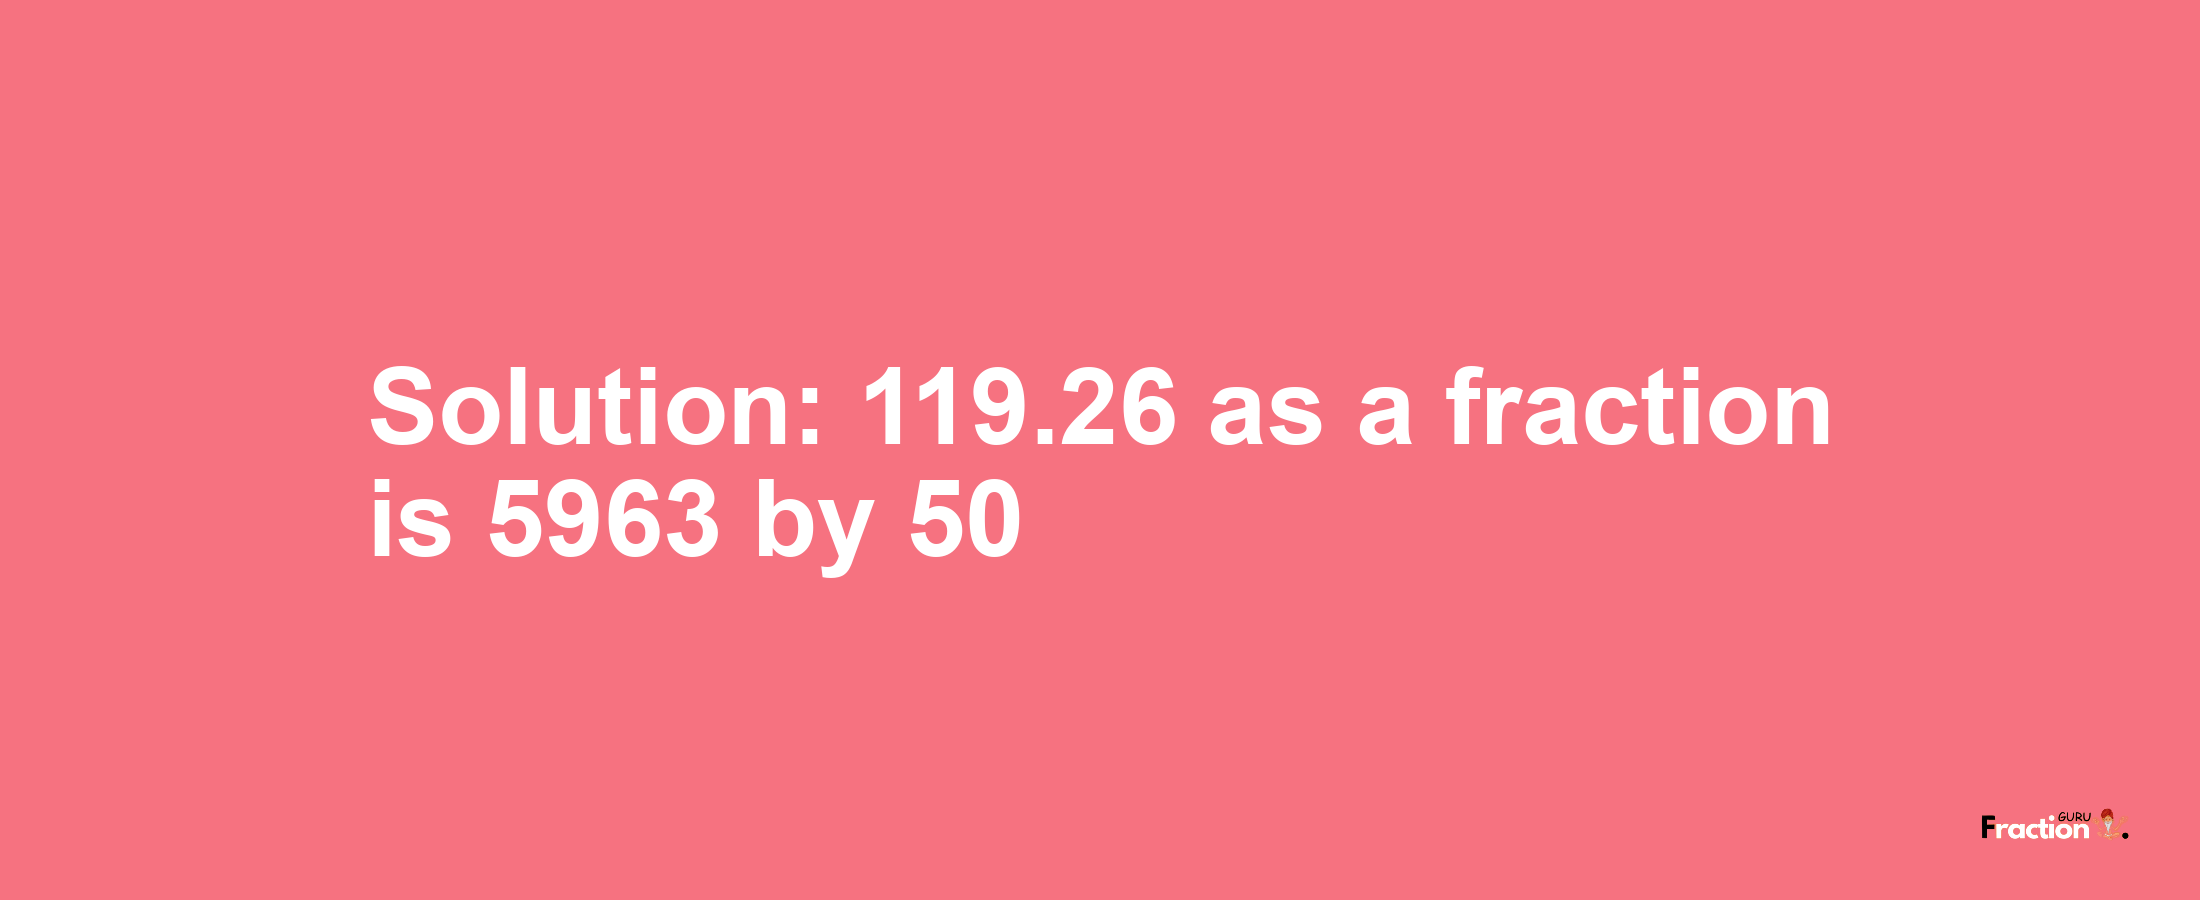 Solution:119.26 as a fraction is 5963/50